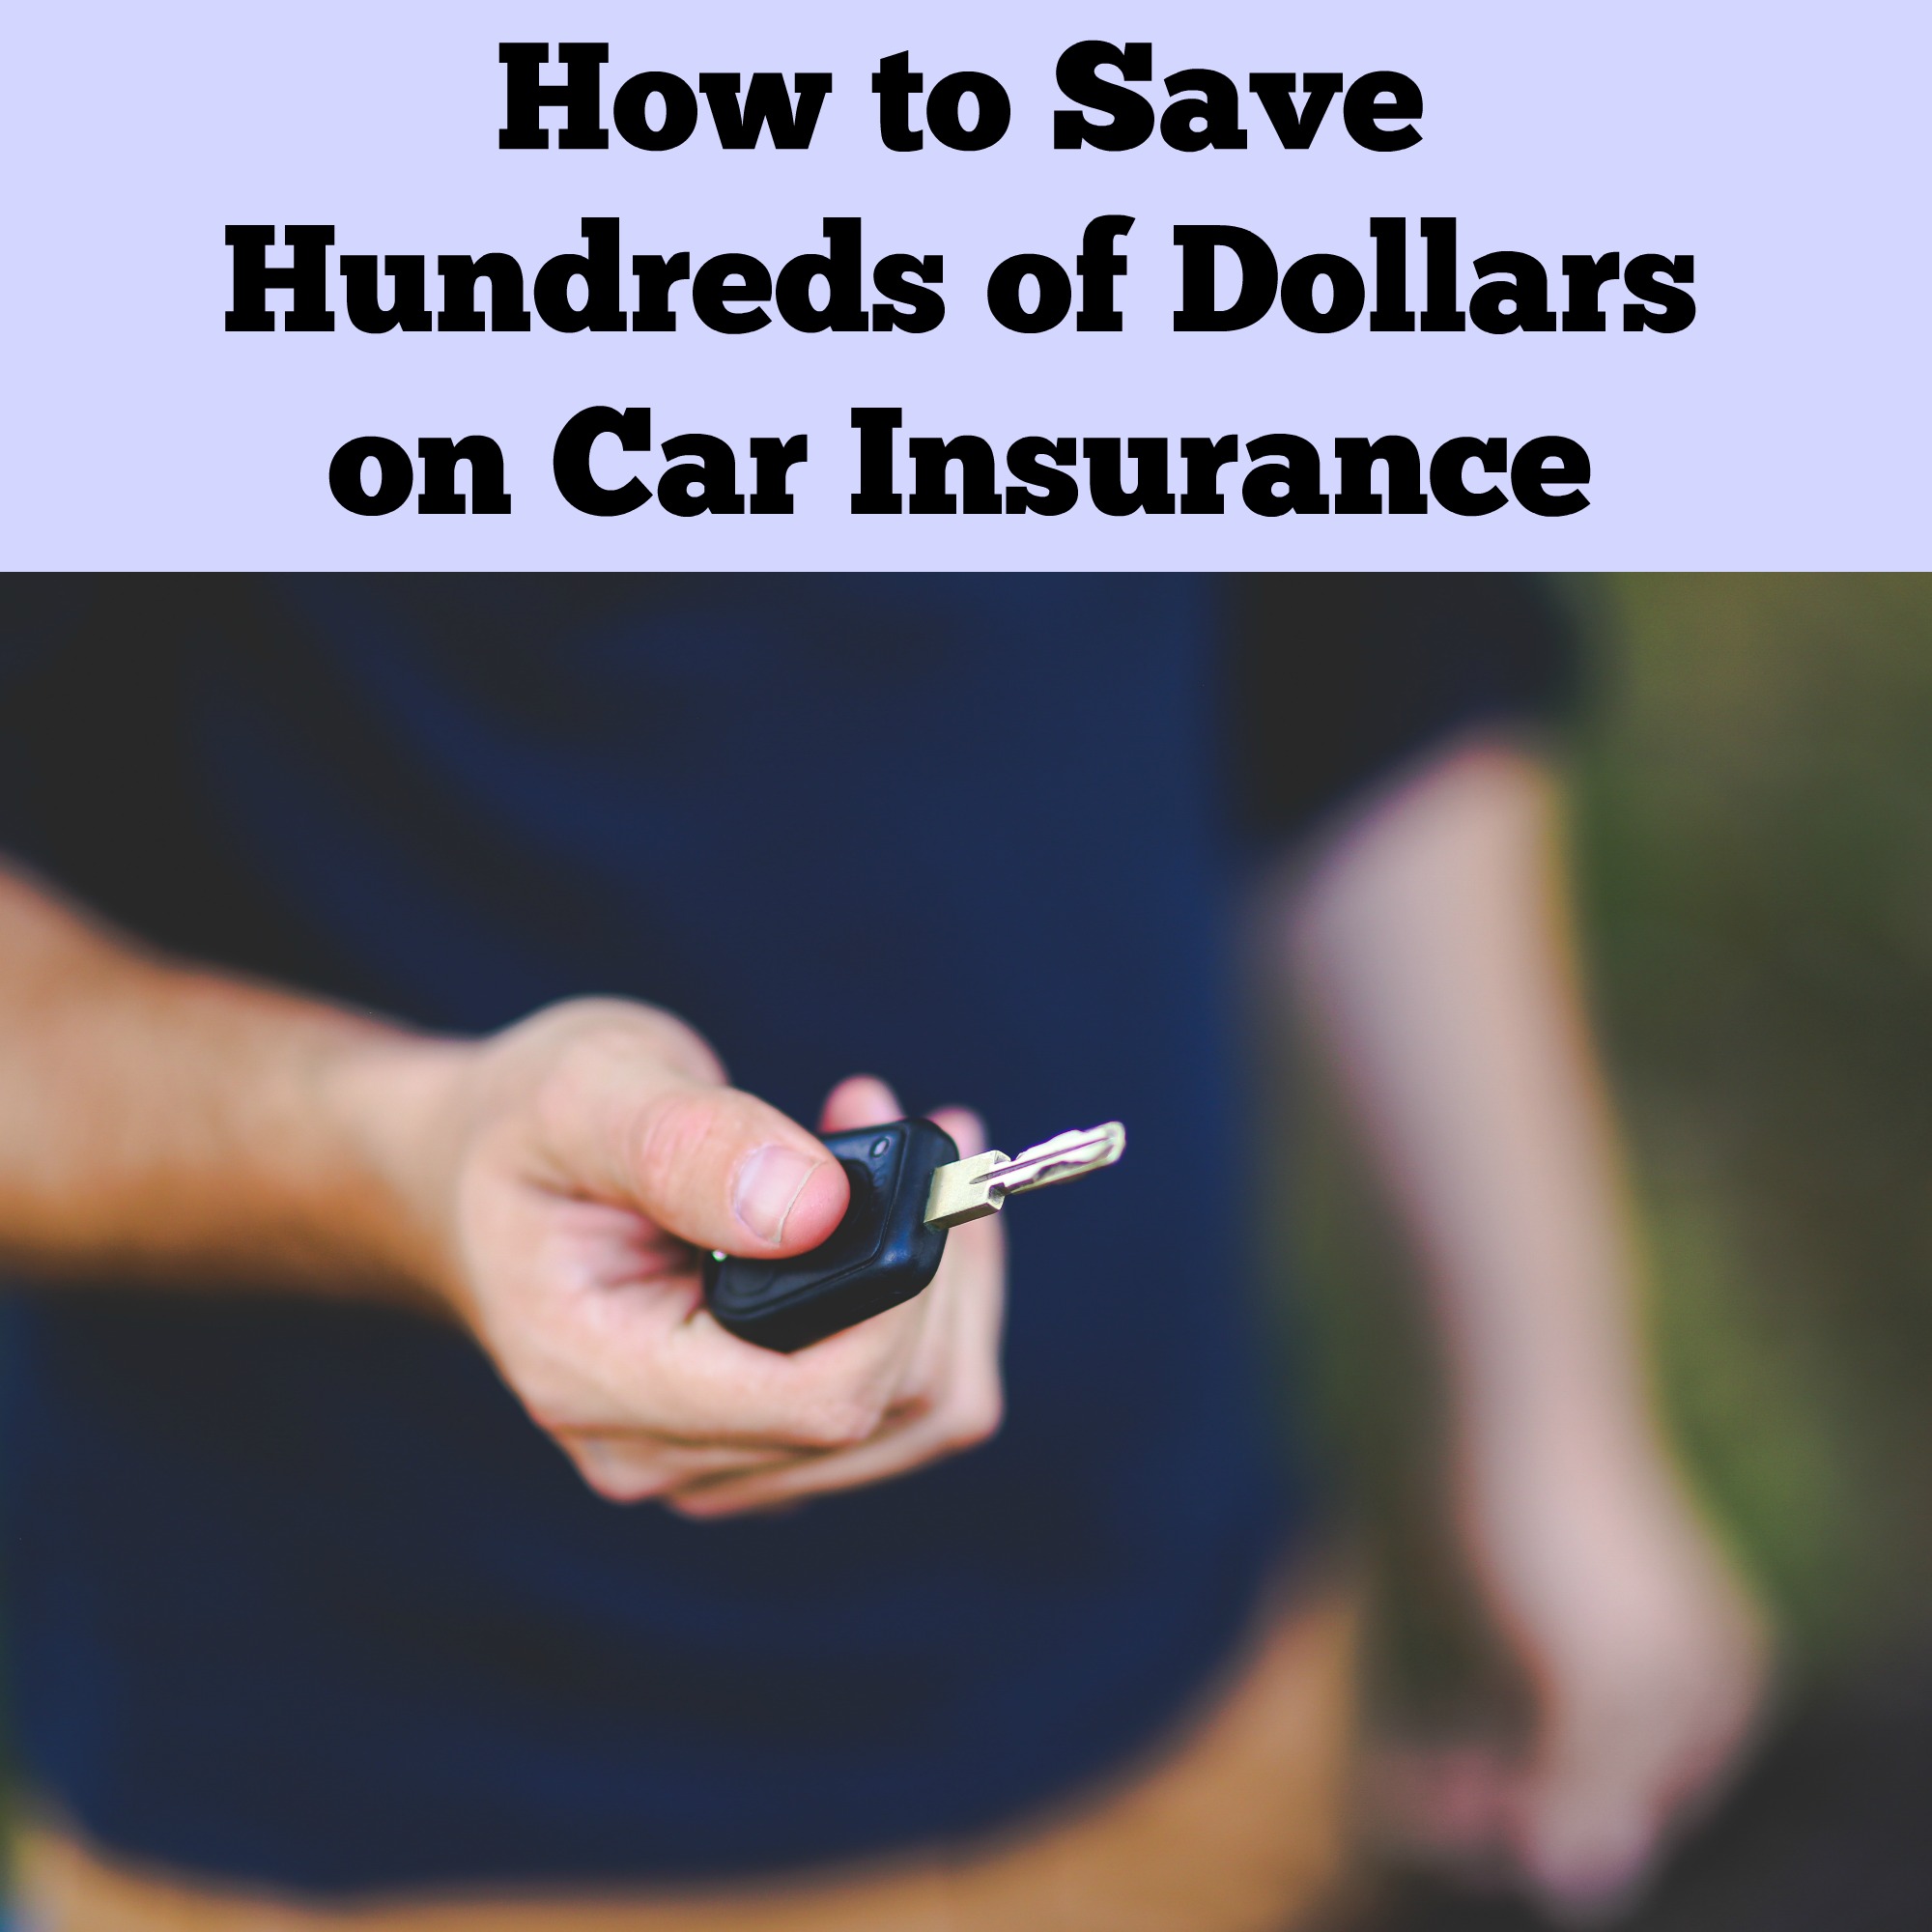 How To Save Hundreds Of Dollars On Car Insurance